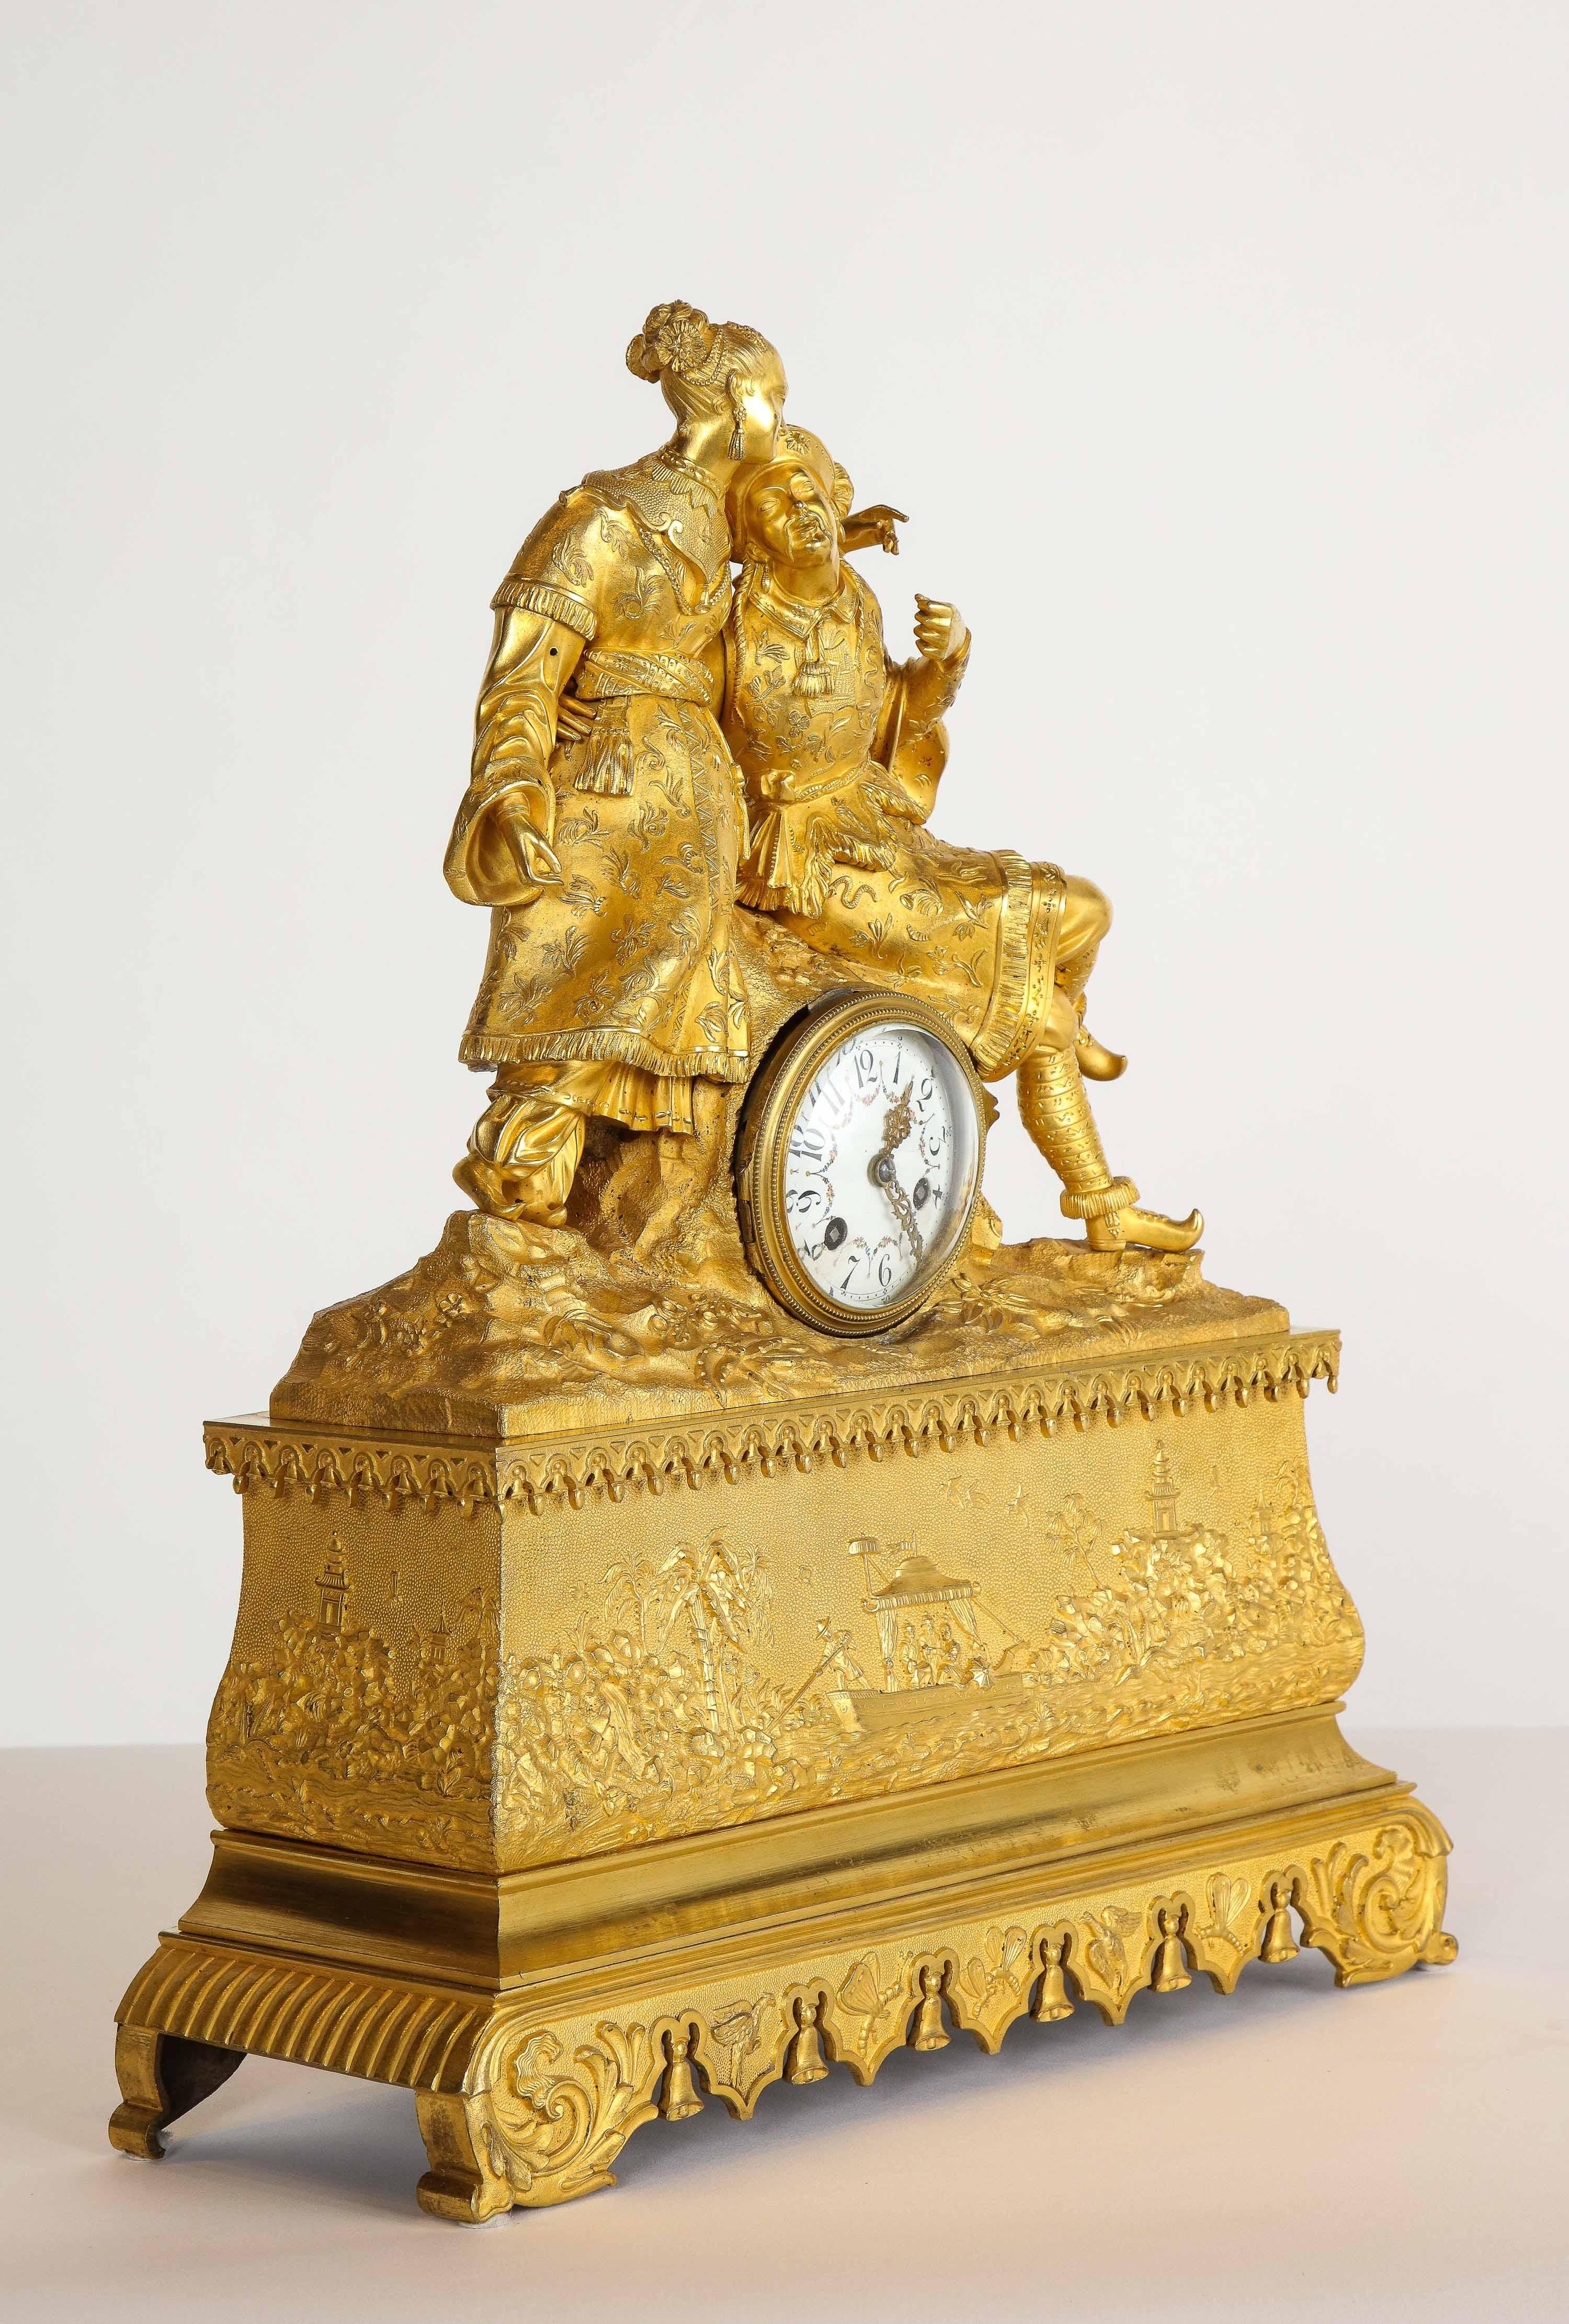 Exquisite French Charles X ormolu bronze chinoiserie figural table clock, early 19th century.

Depicting a Chinese, man and woman. The clock case depicting the China trade.

Very high quality ormolu. Very fine chasing. Fully detailed